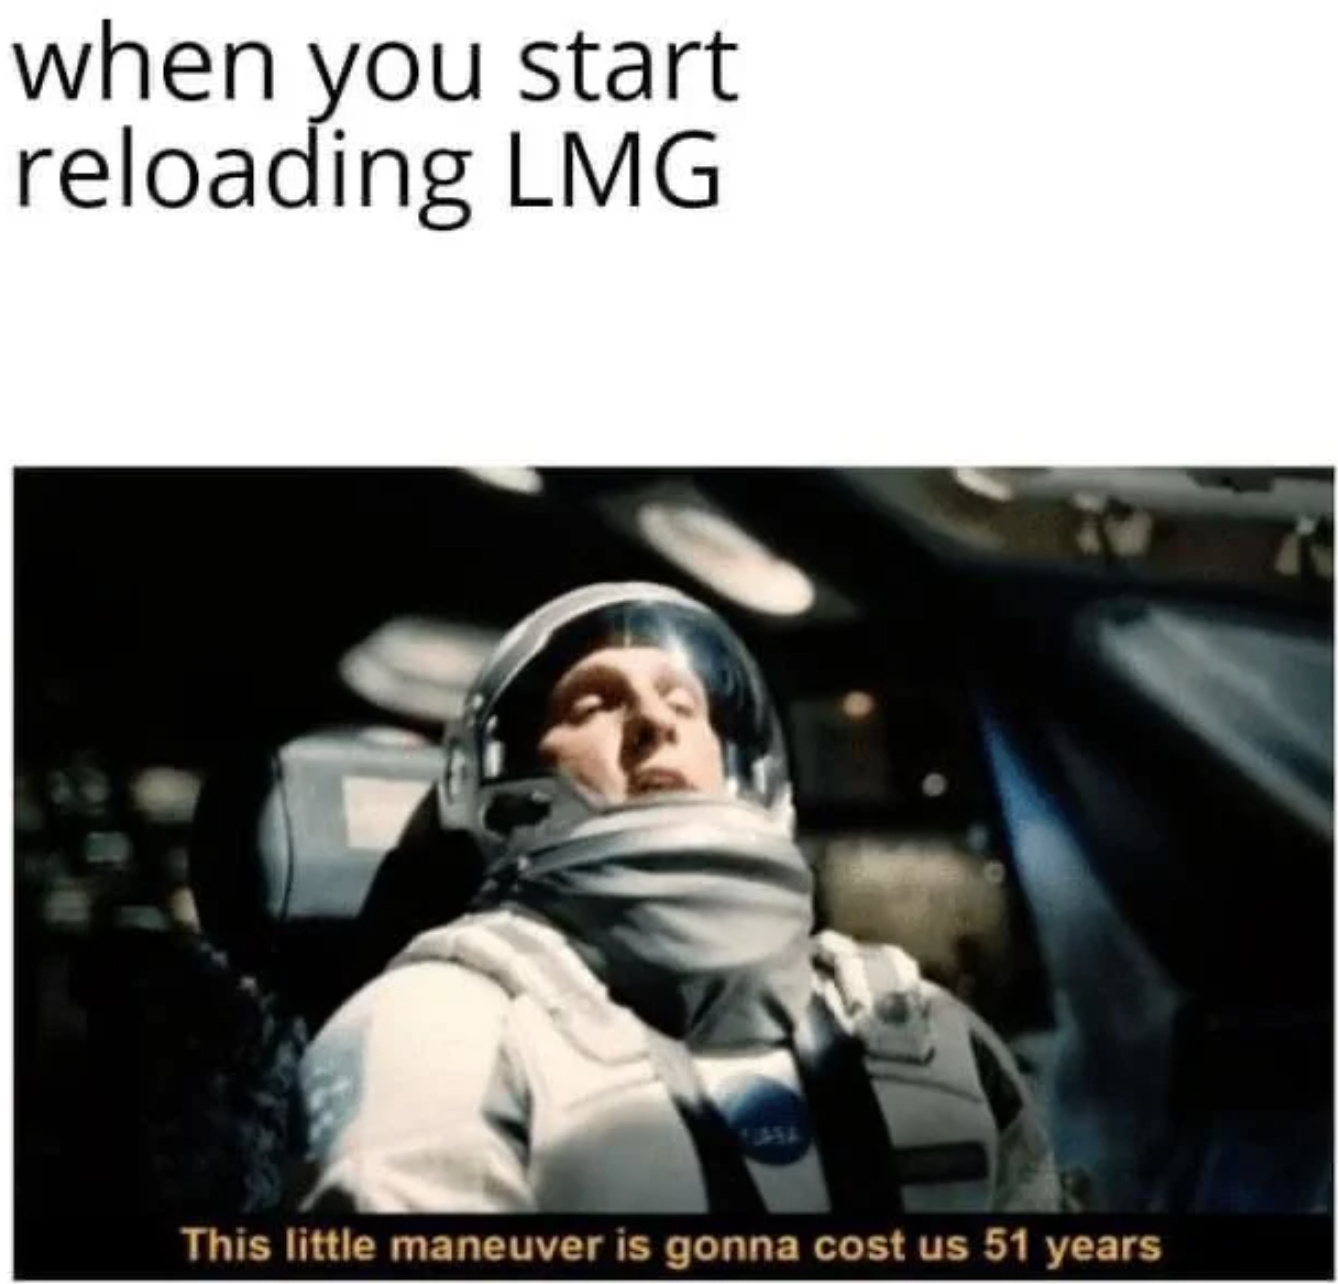 soulmate meme - when you start reloading Lmg This little maneuver is gonna cost us 51 years